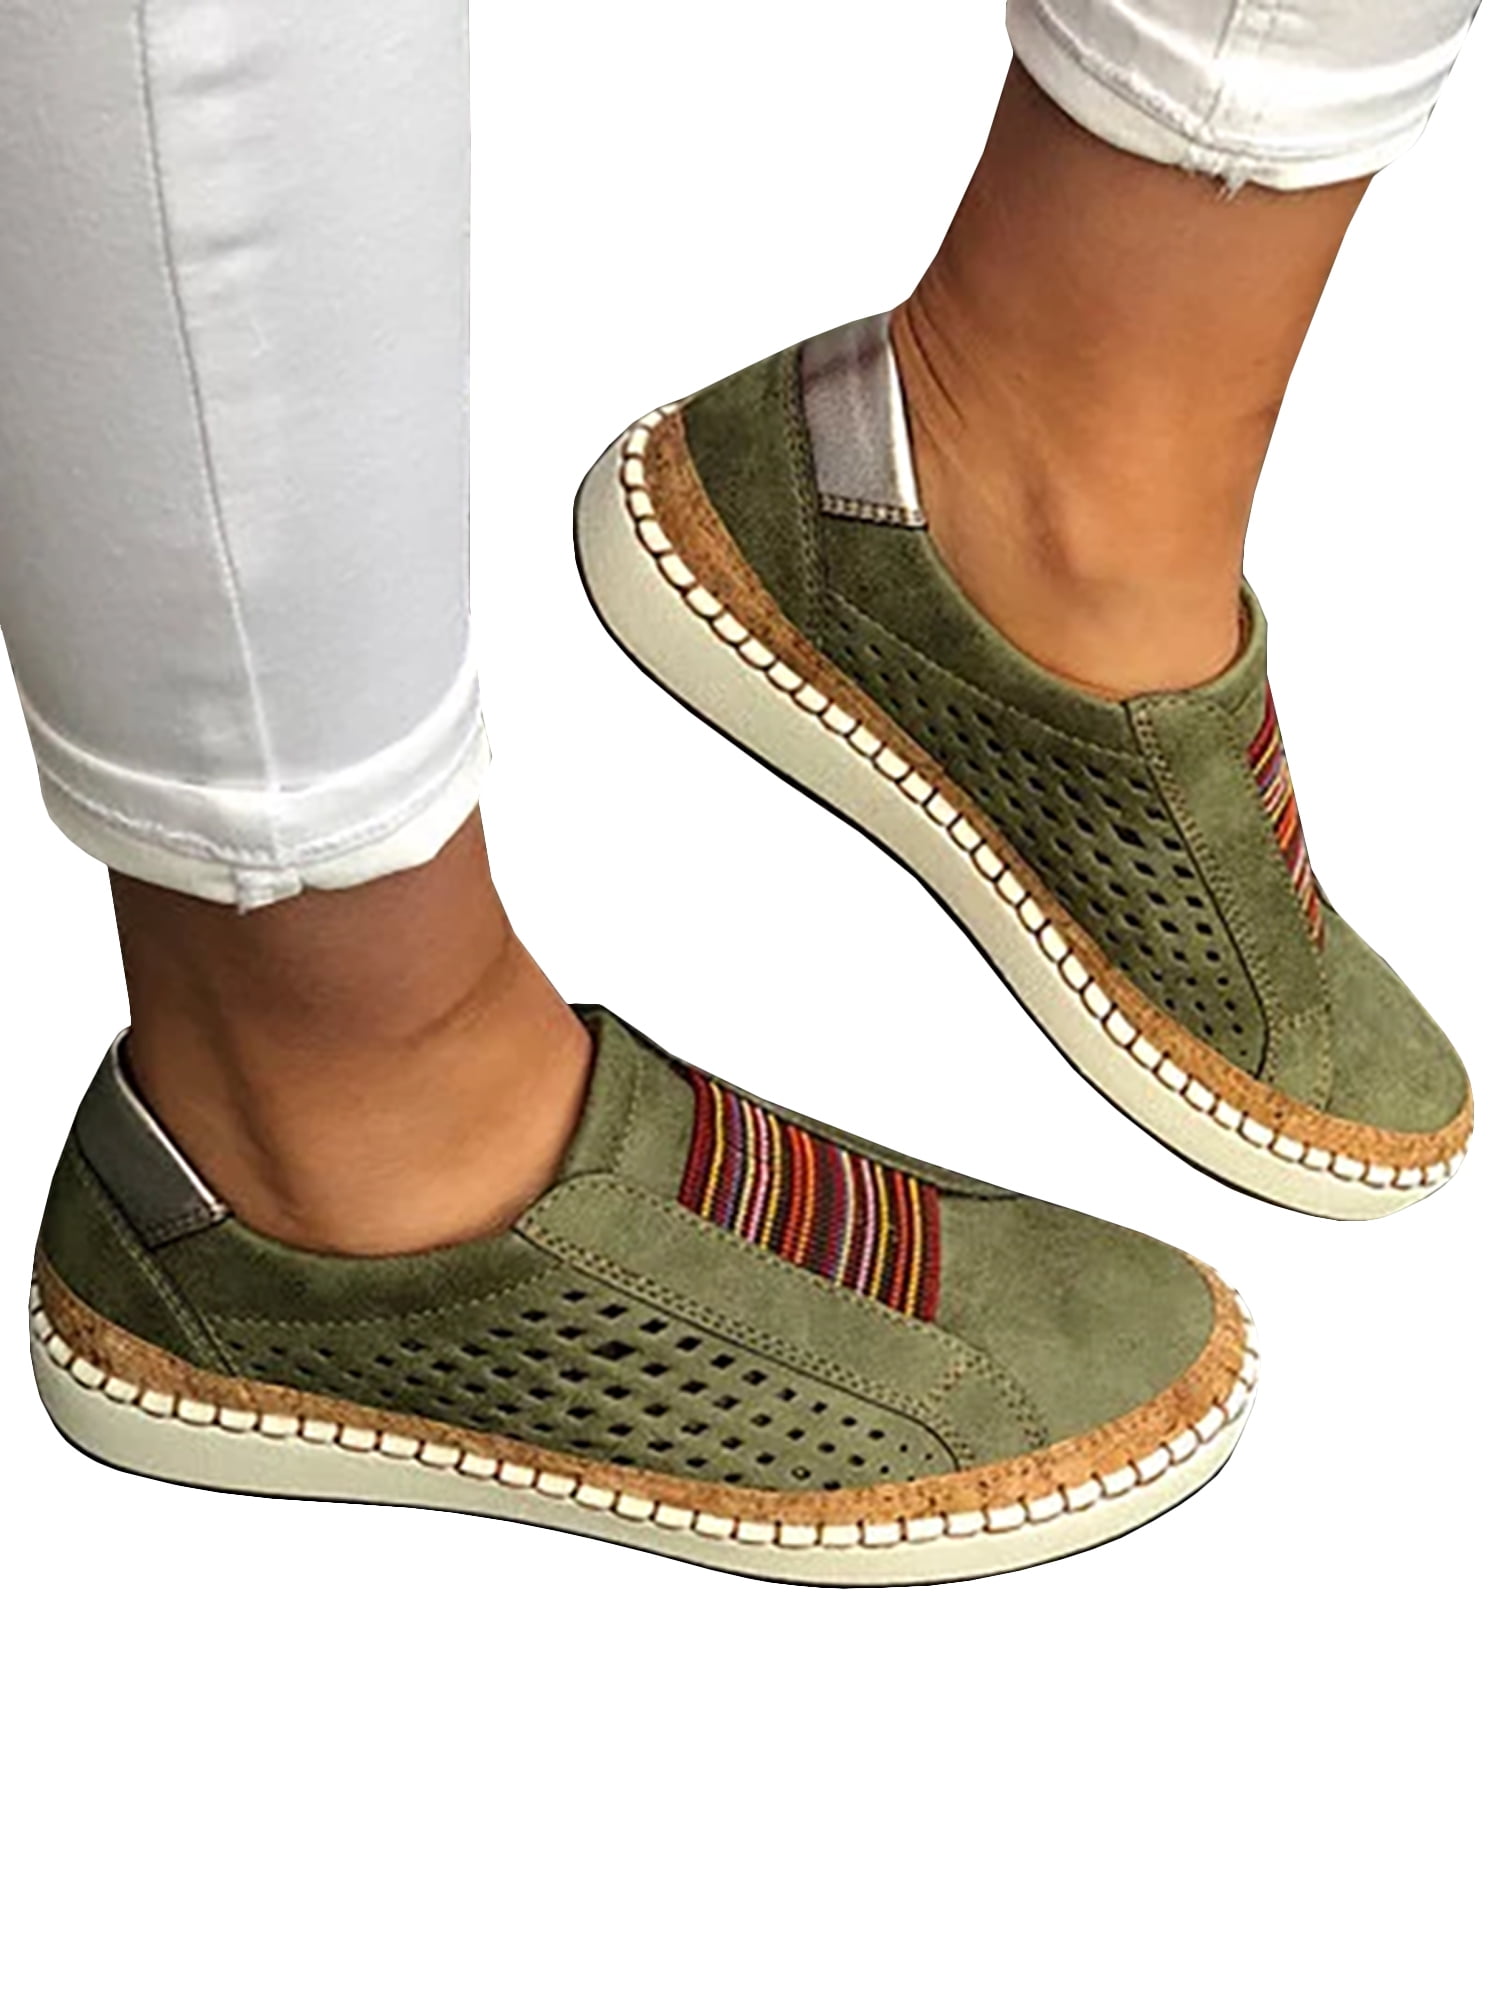 Women Buckle Round toe Mesh Hollow out Casual Athletic Sneakers Breathable Shoes